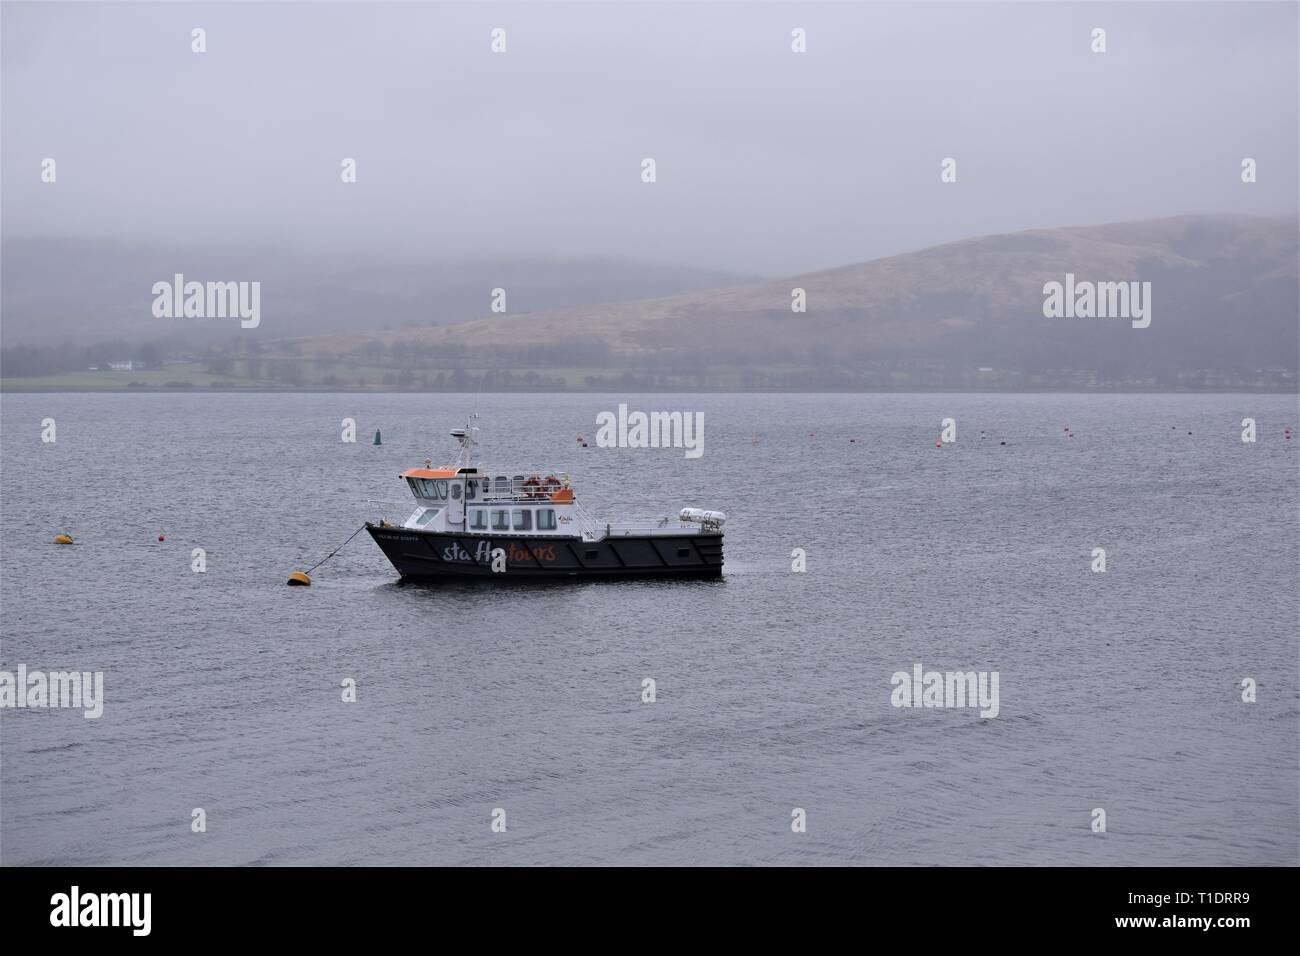 Staffa Tours Boat at anchor in Loch Creran mist. A sense of remote misty isolation in a Scottish sea loch close to the salmon hatchery at Barcaldine. Stock Photo